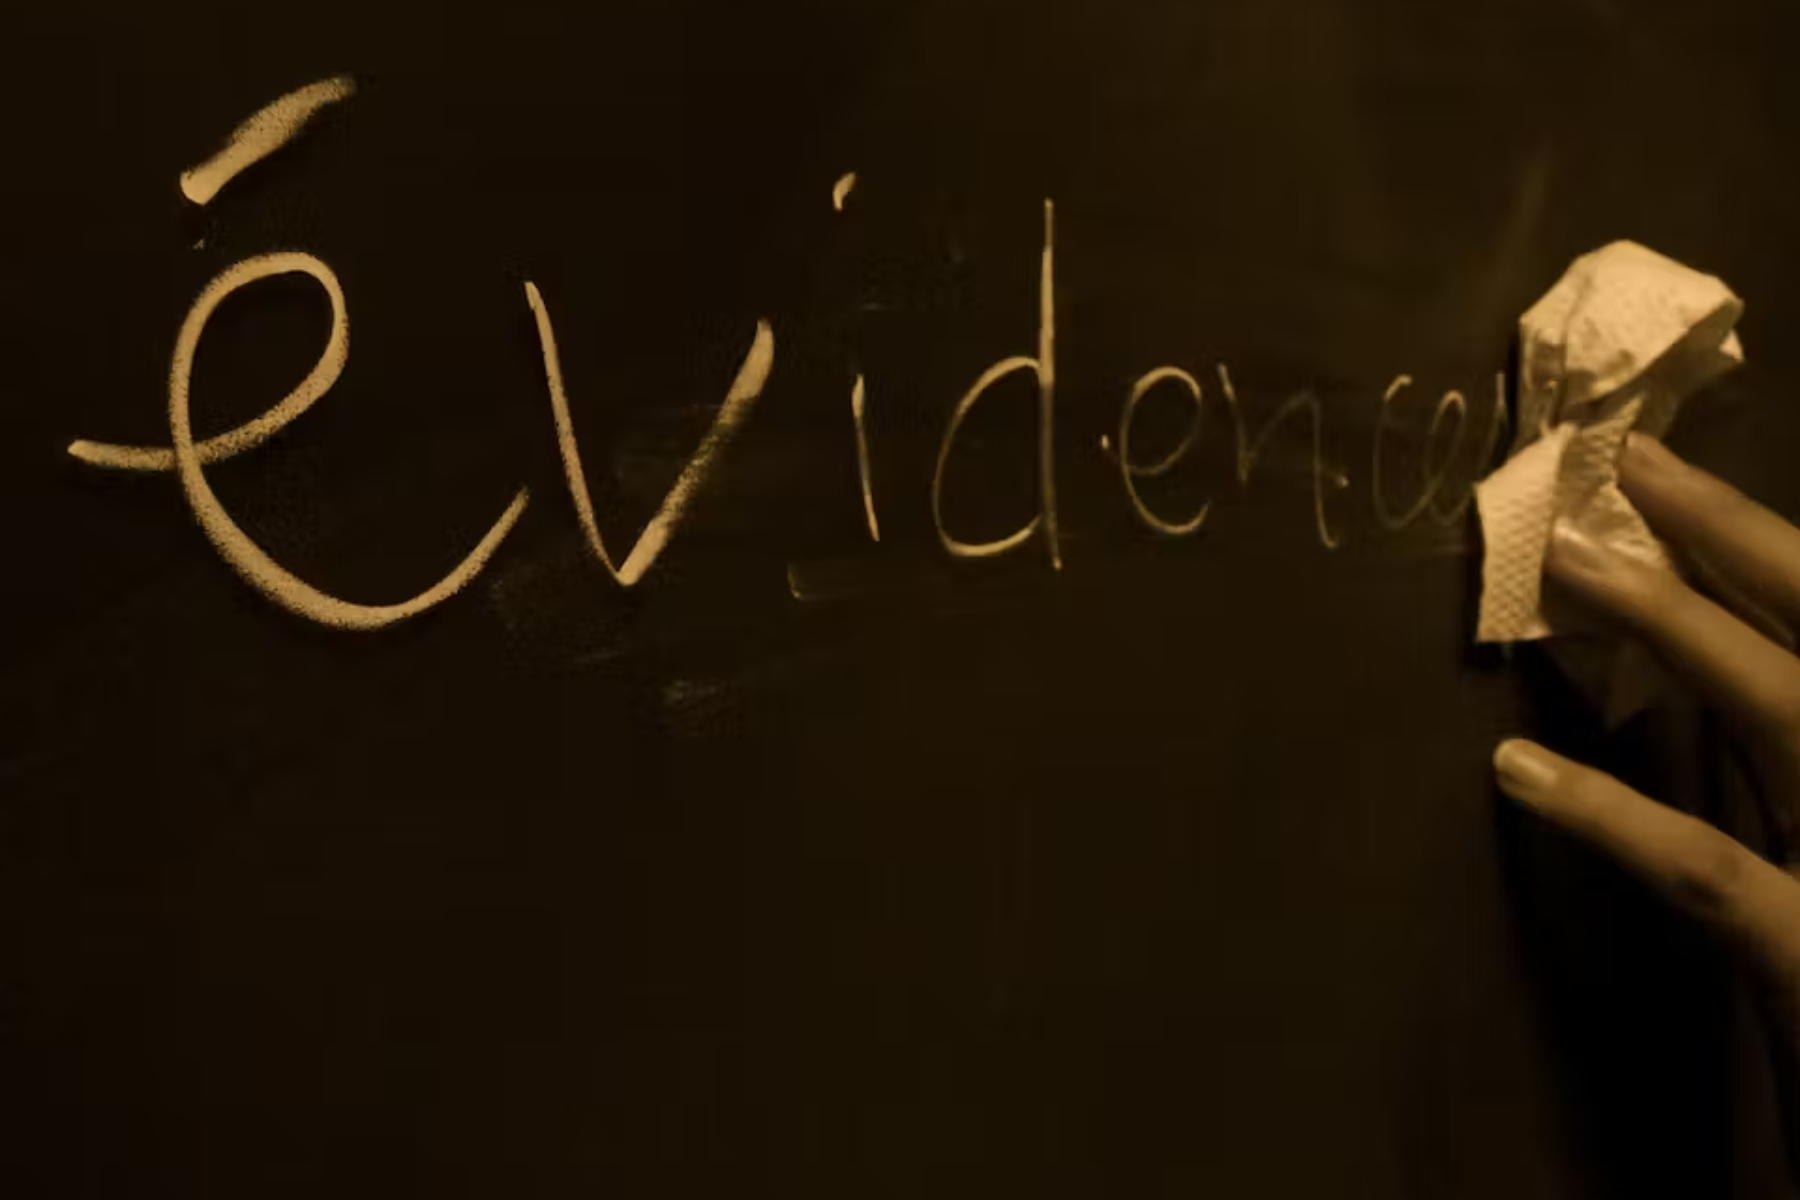 A tissue is being used to clean a black board with the word evidence printed on it